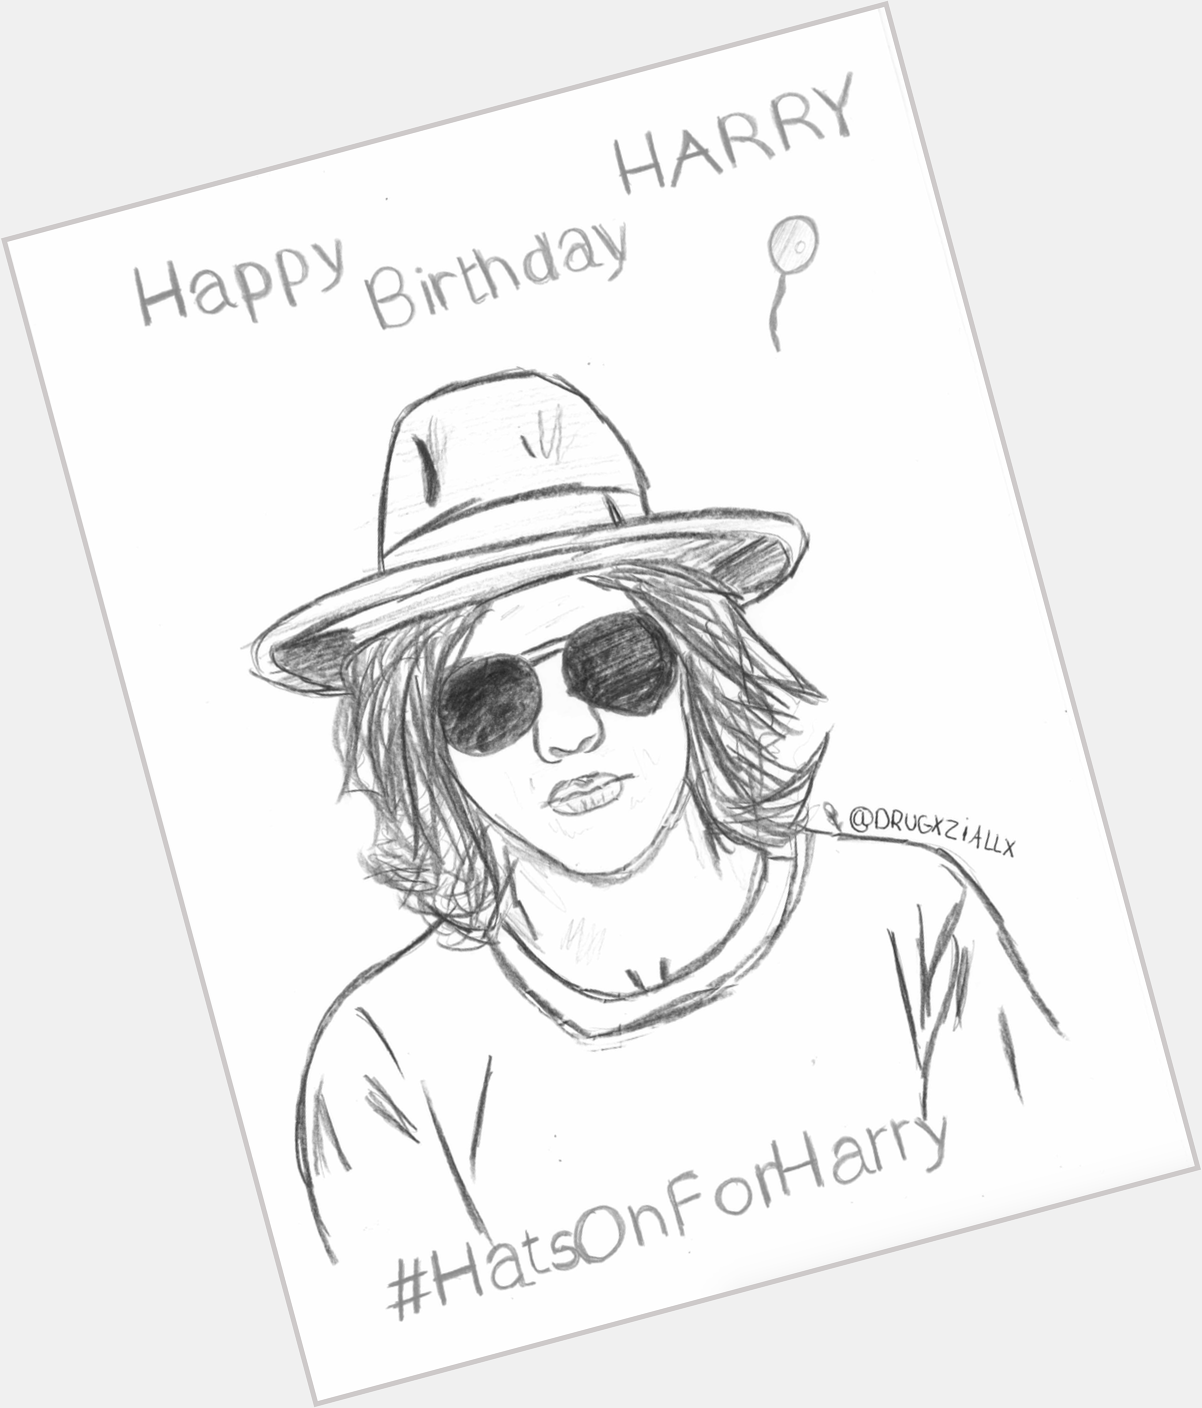 Happy birthday, I hope you will have hats today and you like my drawing.   